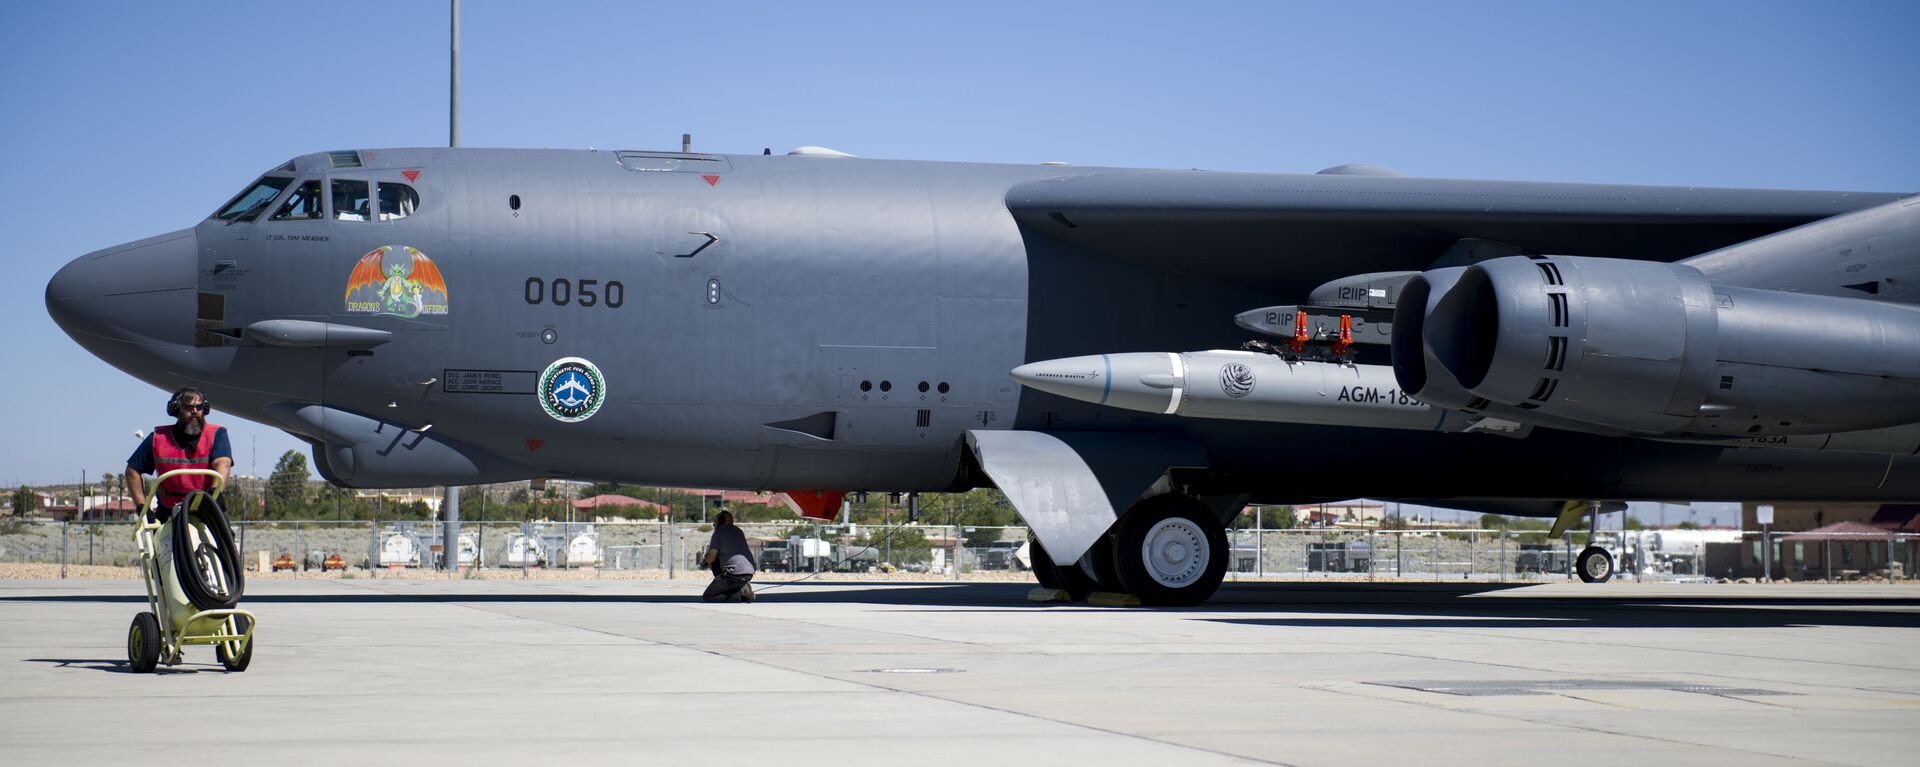 A B-52H Stratofortress assigned to the 419th Flight Test Squadron is undergoes pre-flight procedures at Edwards Air Force Base, California, Aug. 8. The aircraft conducted a captive-carry flight test of the AGM-183A Air-launched Rapid Response Weapon Instrumented Measurement Vehicle 2 at the Point Mugu Sea Range off the Southern California coast. - Sputnik International, 1920, 08.03.2022